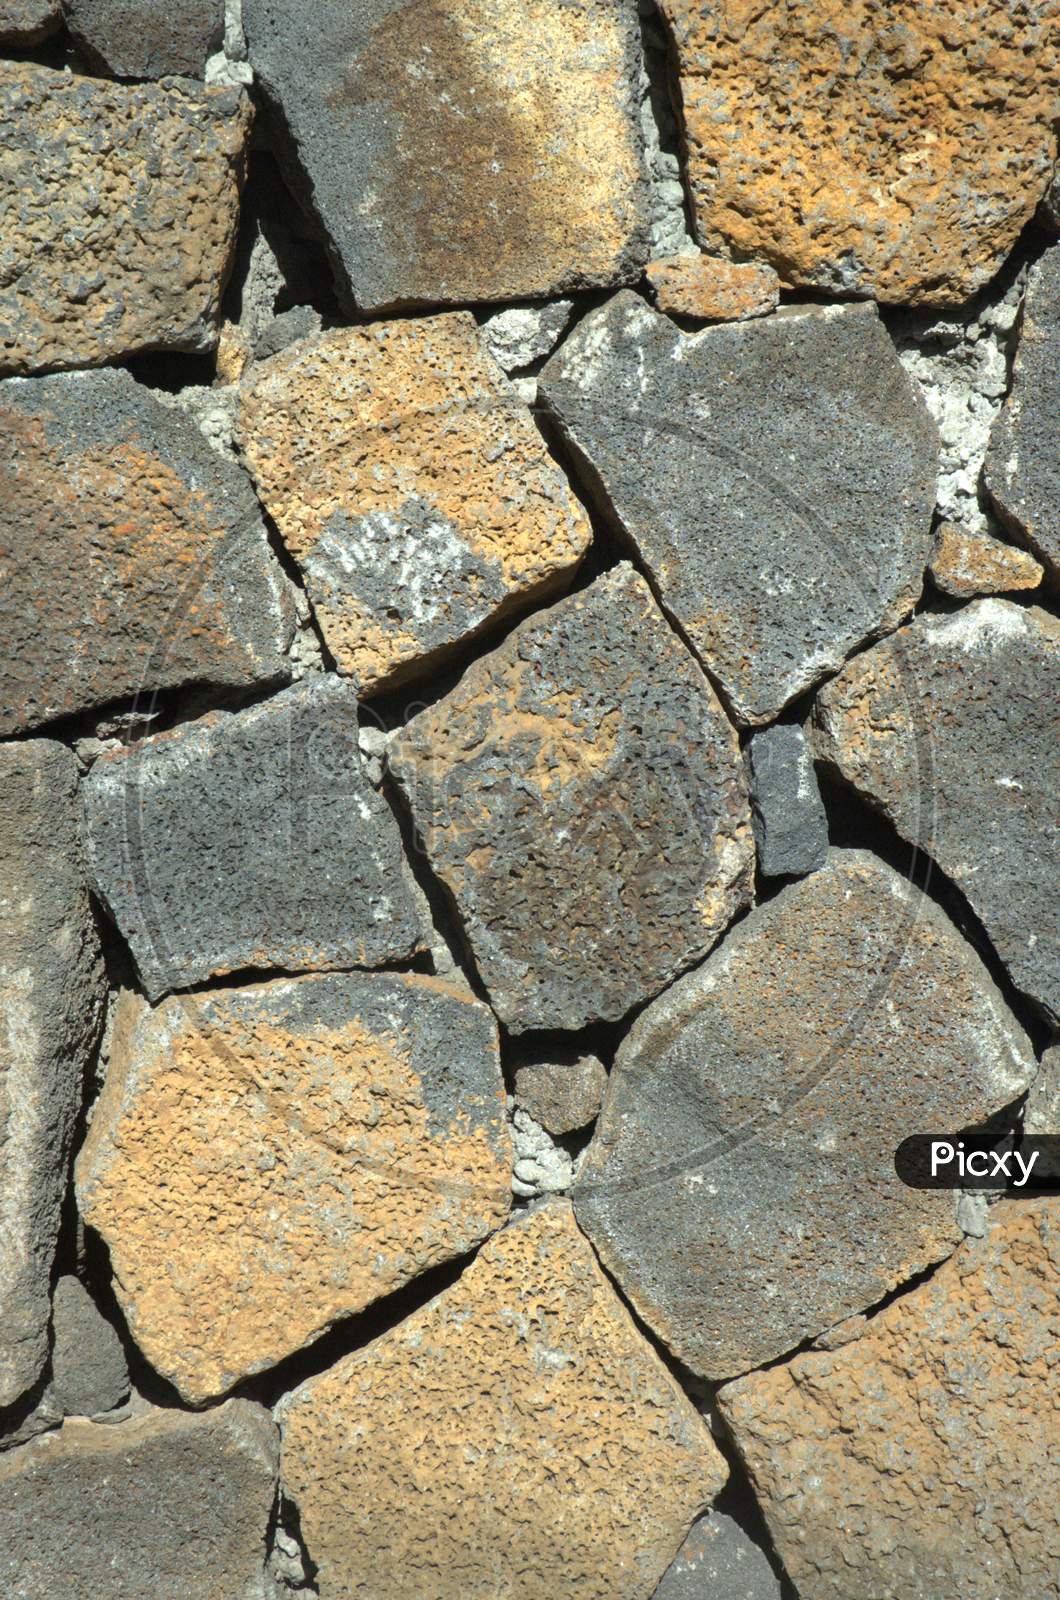 Texture And Patterns Of Stones At a Beach